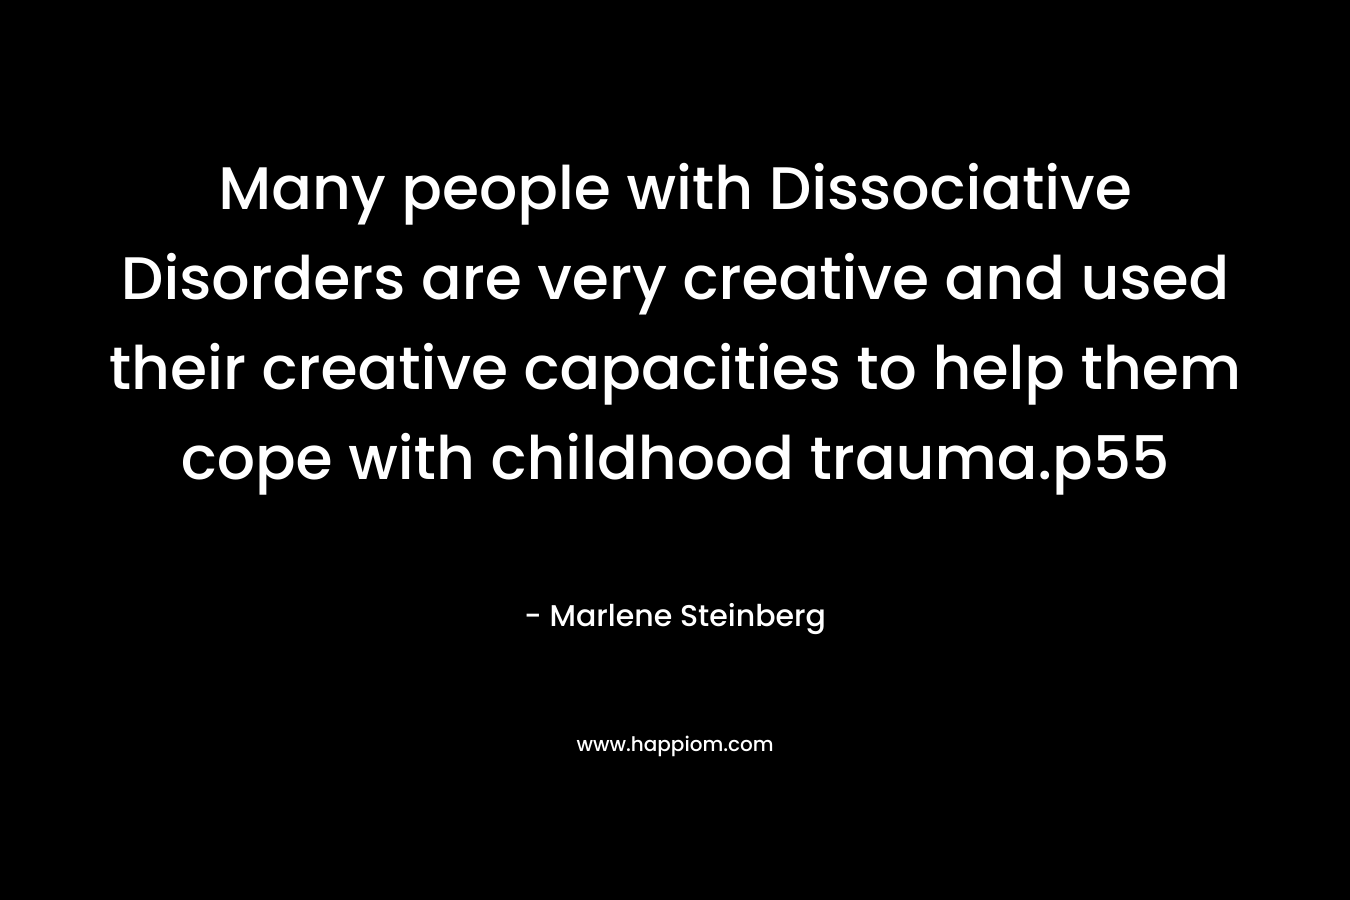 Many people with Dissociative Disorders are very creative and used their creative capacities to help them cope with childhood trauma.p55